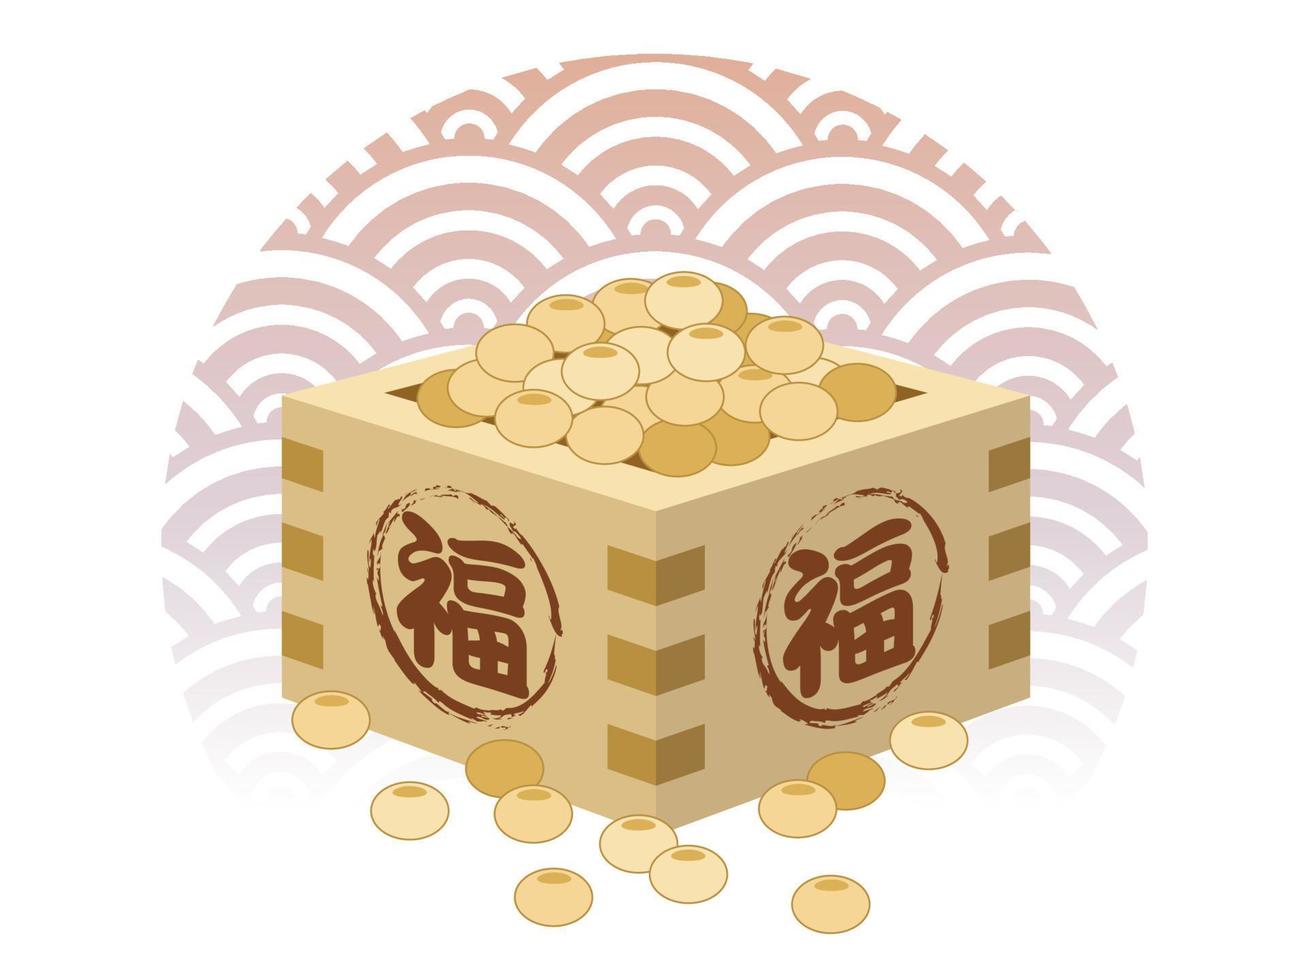 Lucky Beans In A Square Wooden Container For Japanese SETSUBUN, The End Of The Winter Festival.  Vector Illustration. Text Translation - Fortune.